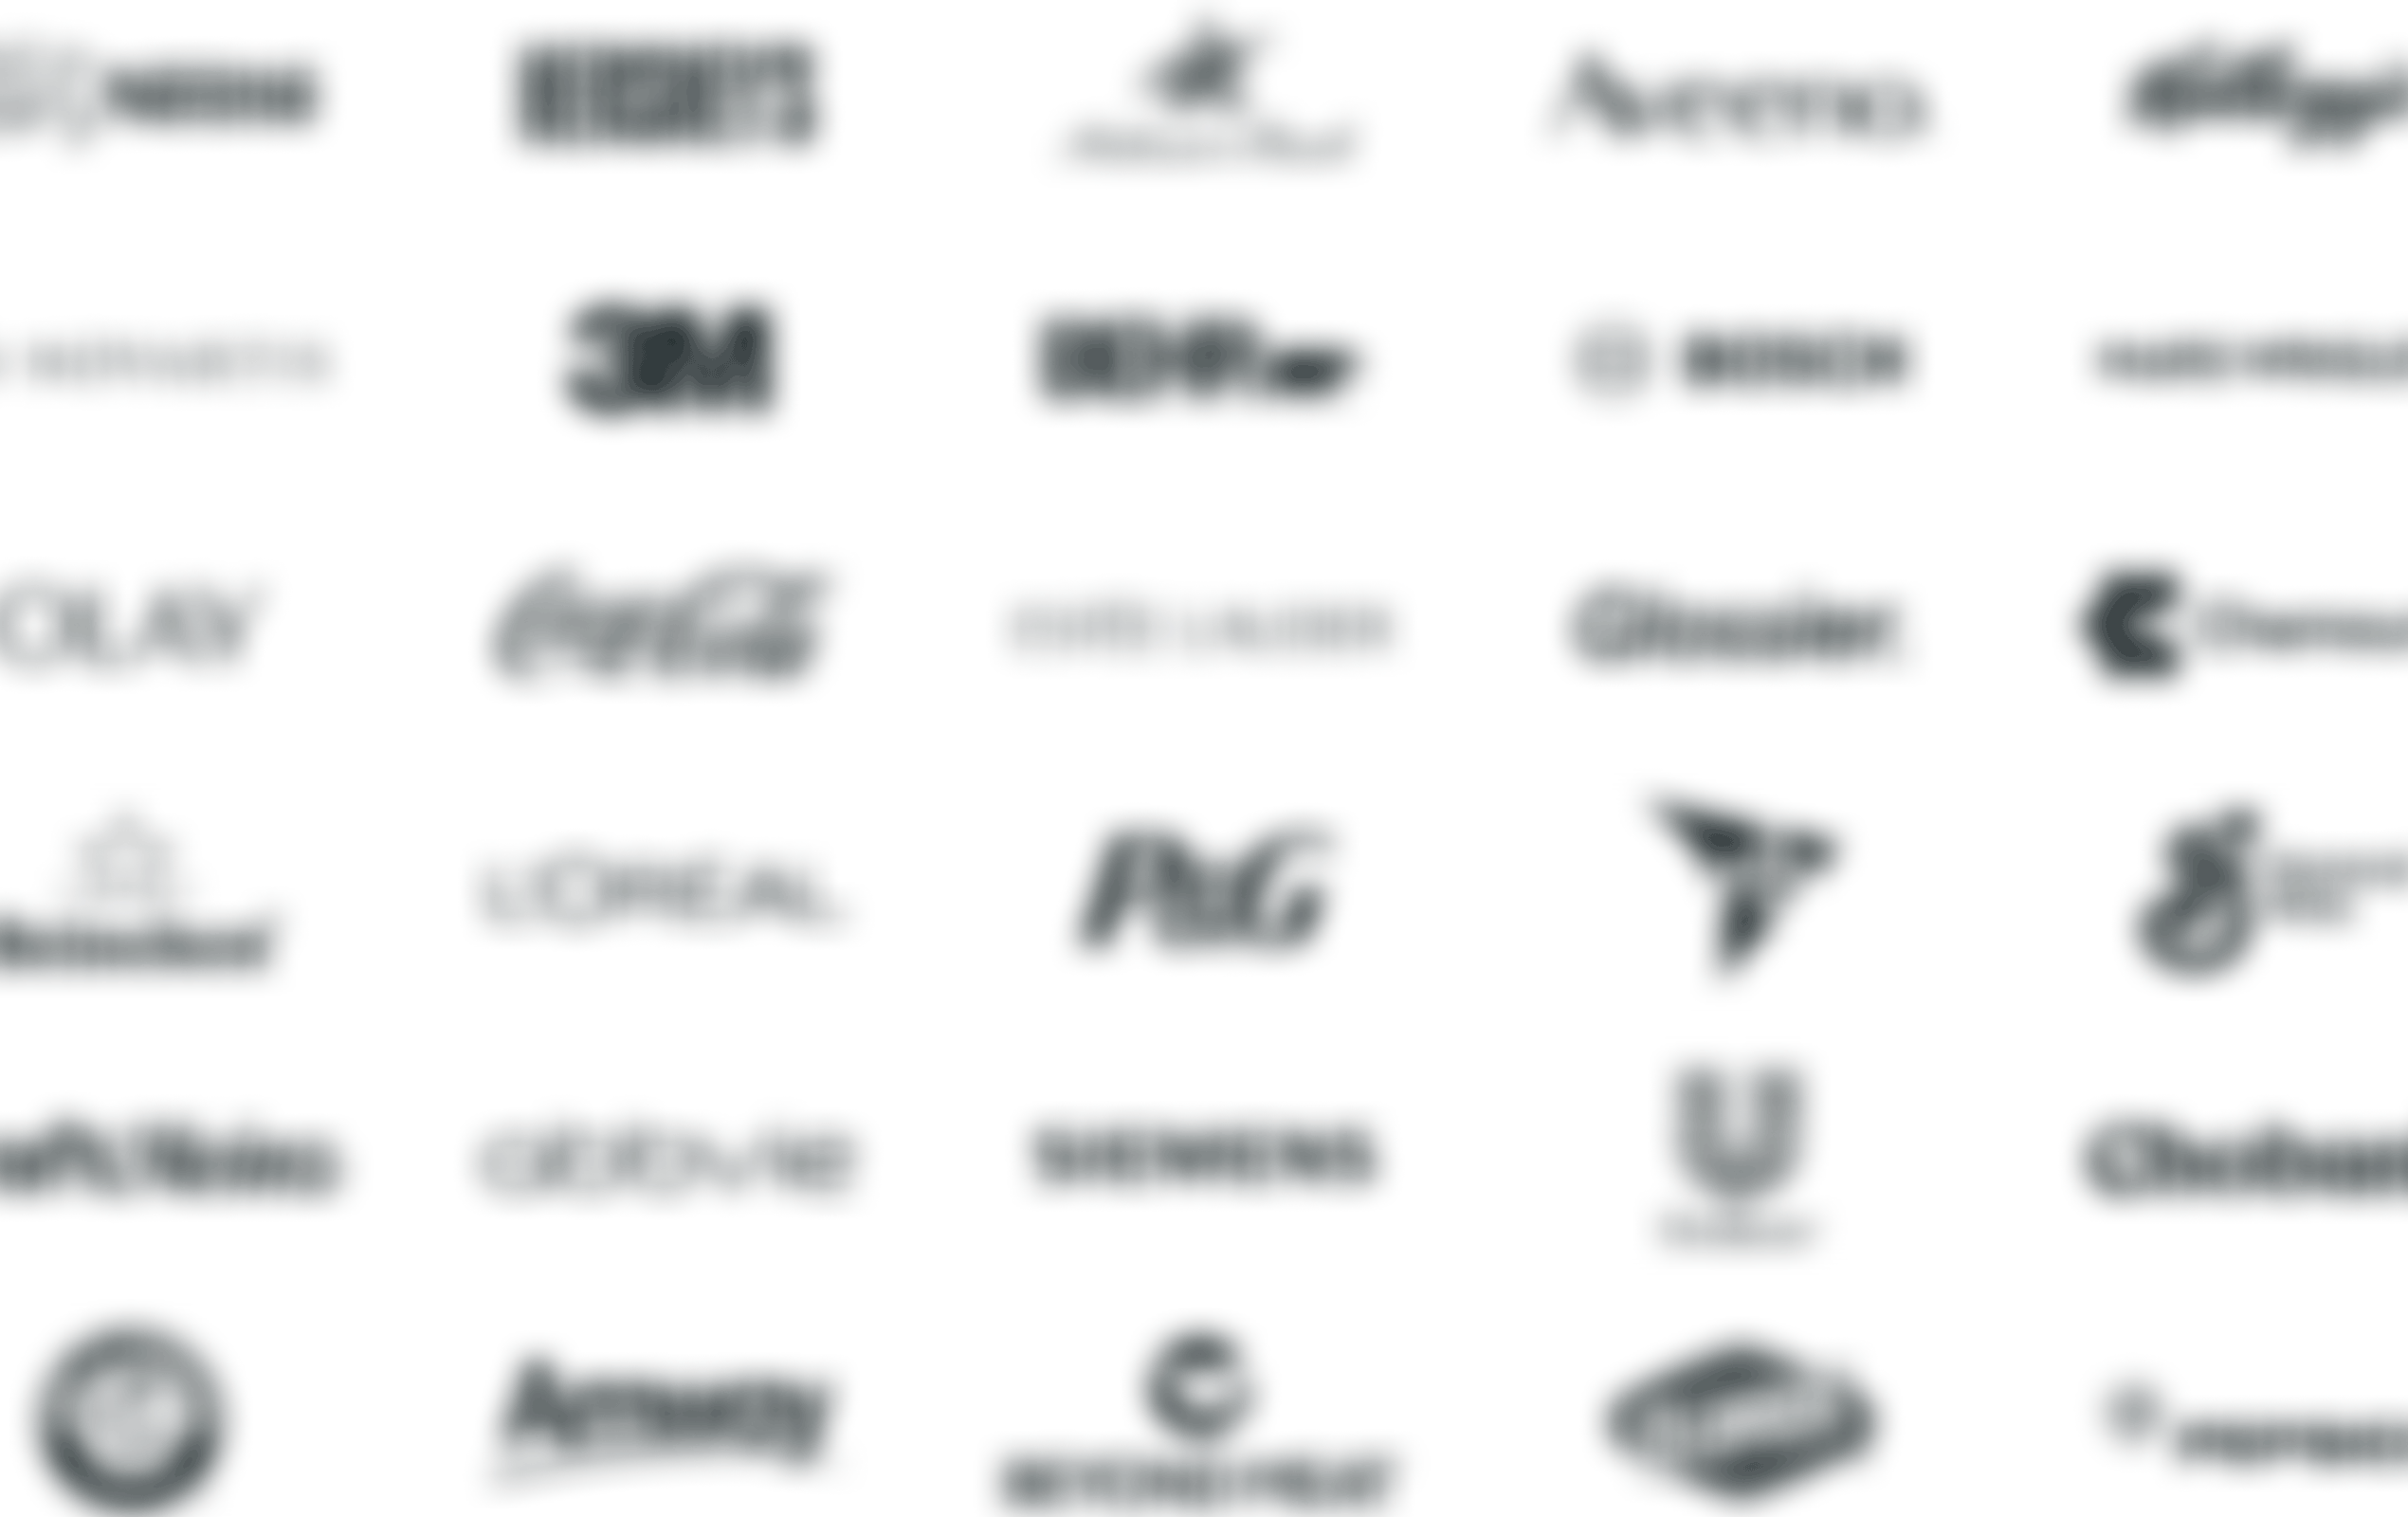 GIF of big buyer brands, including 3M, Glossier, Siemens, Clorox, and Kellogg's